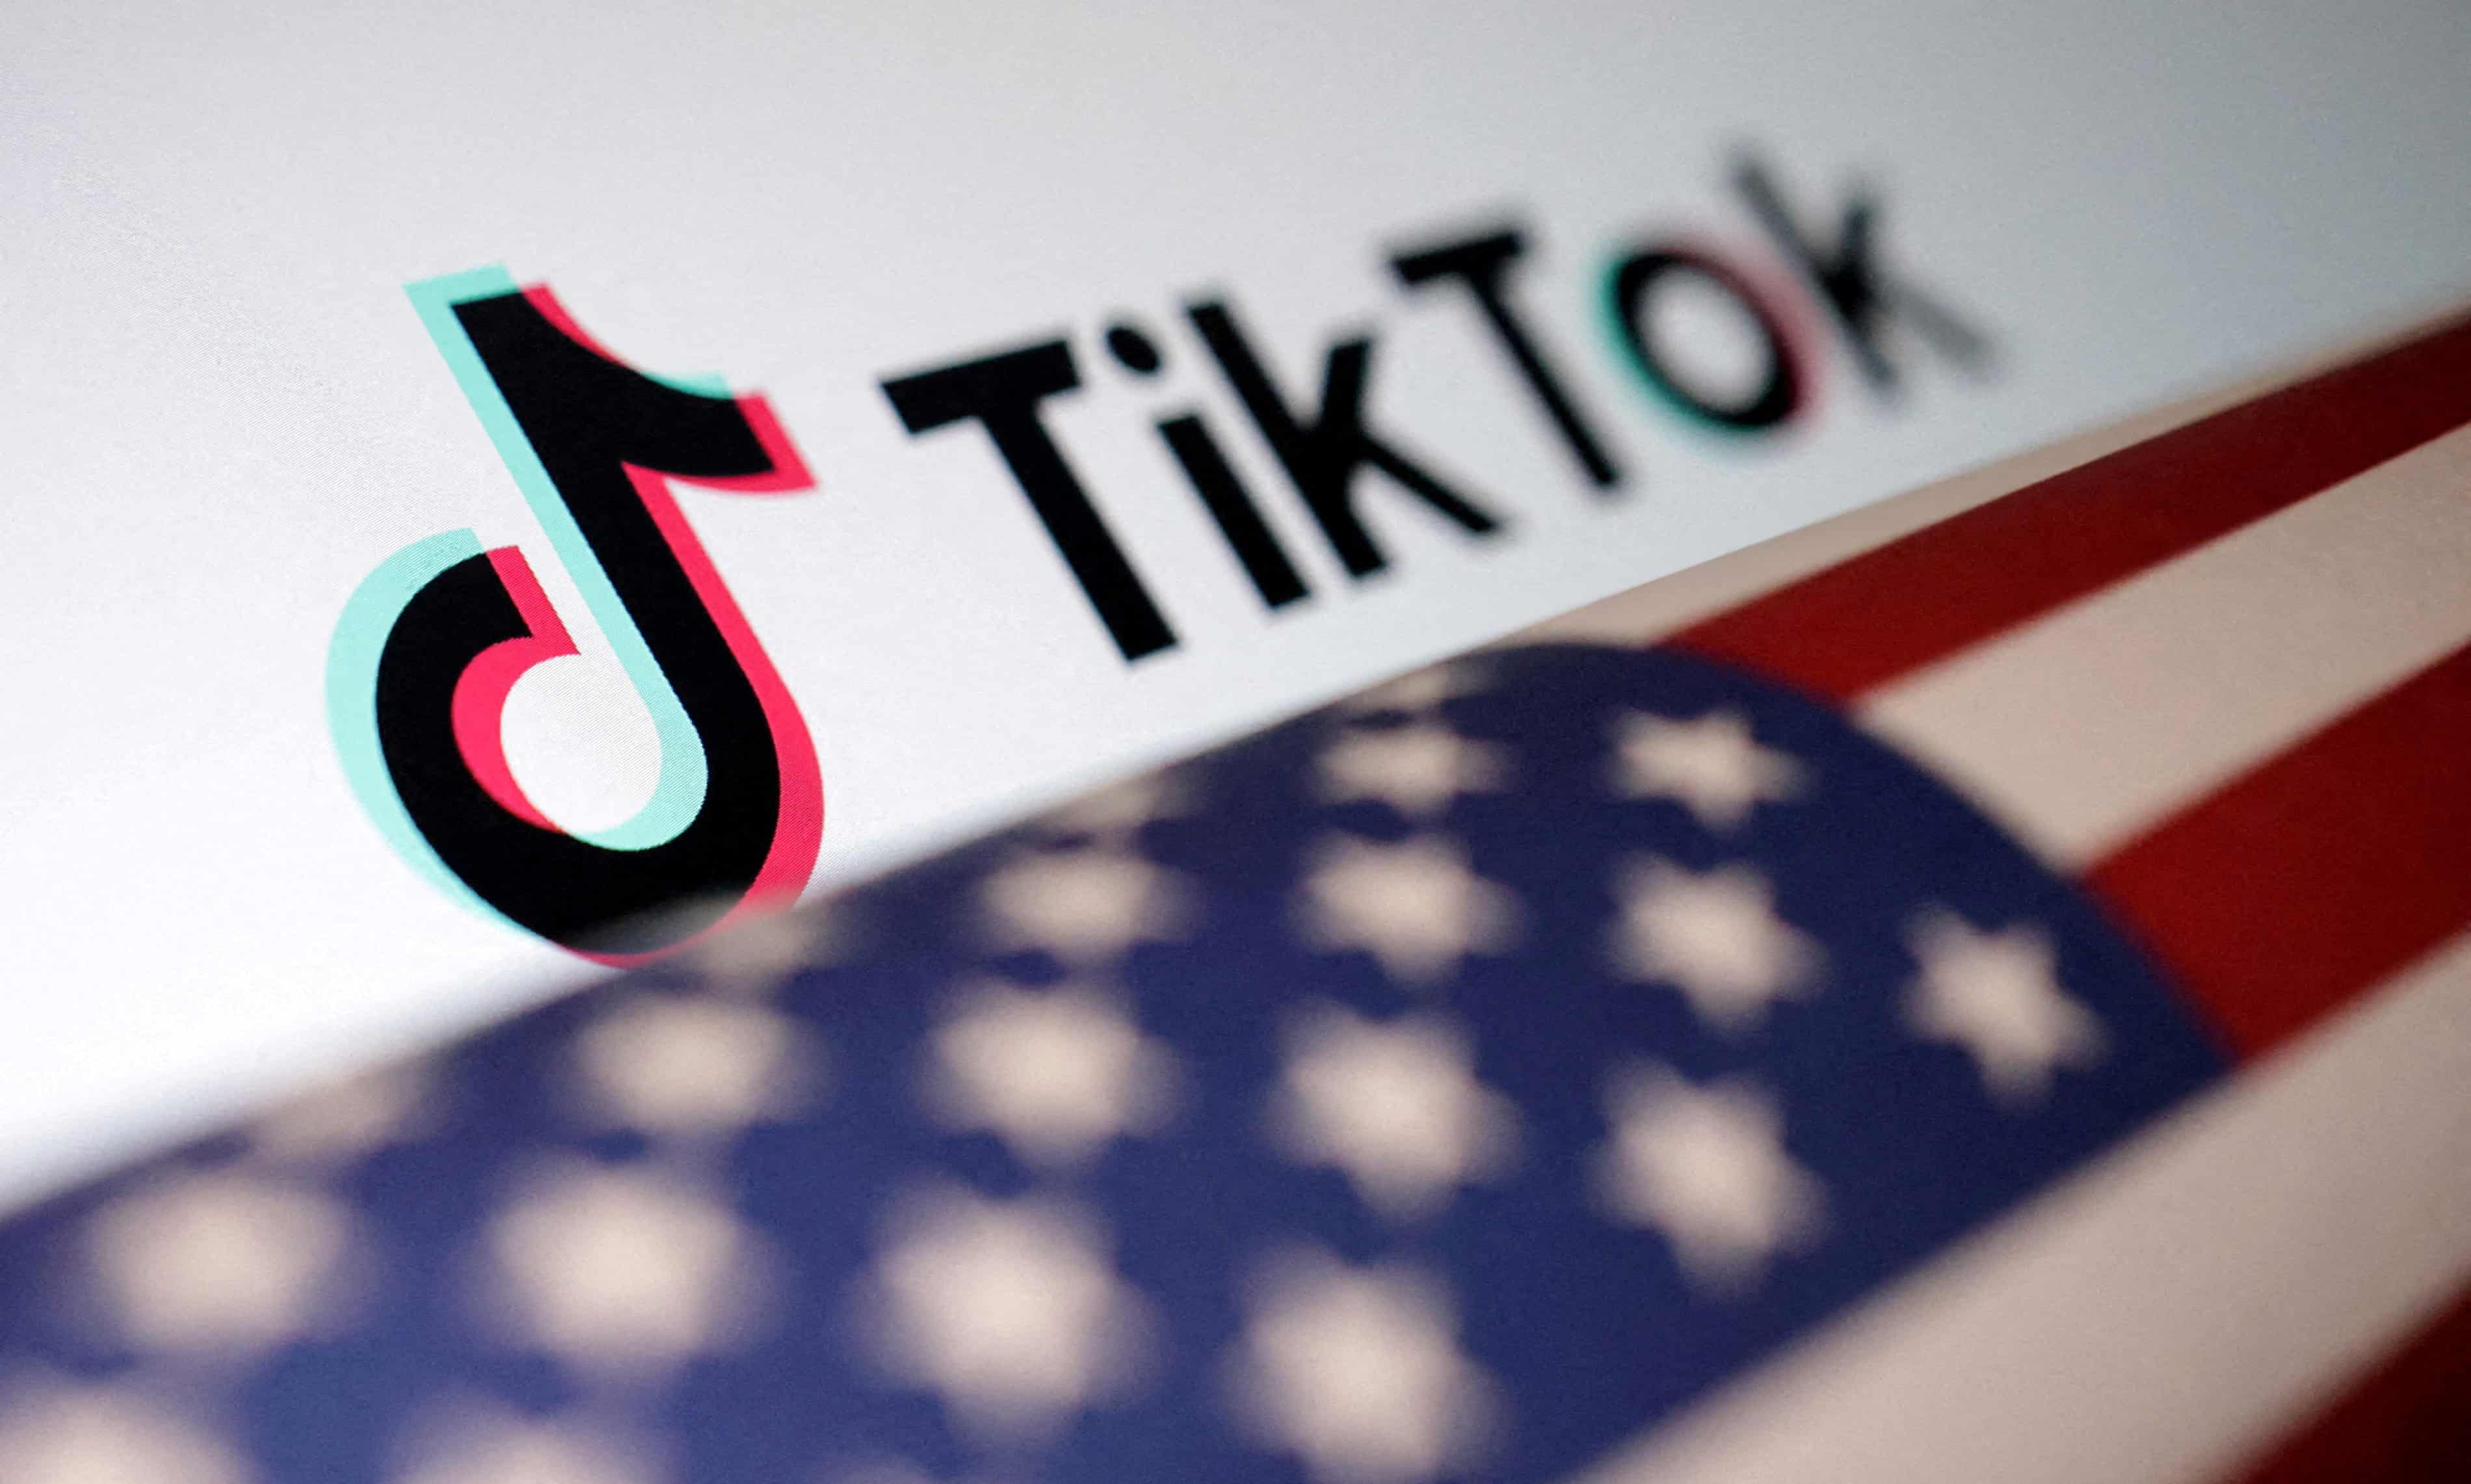 TikTok says it will fight US ban or forced sale after bill passes (theguardian.com)